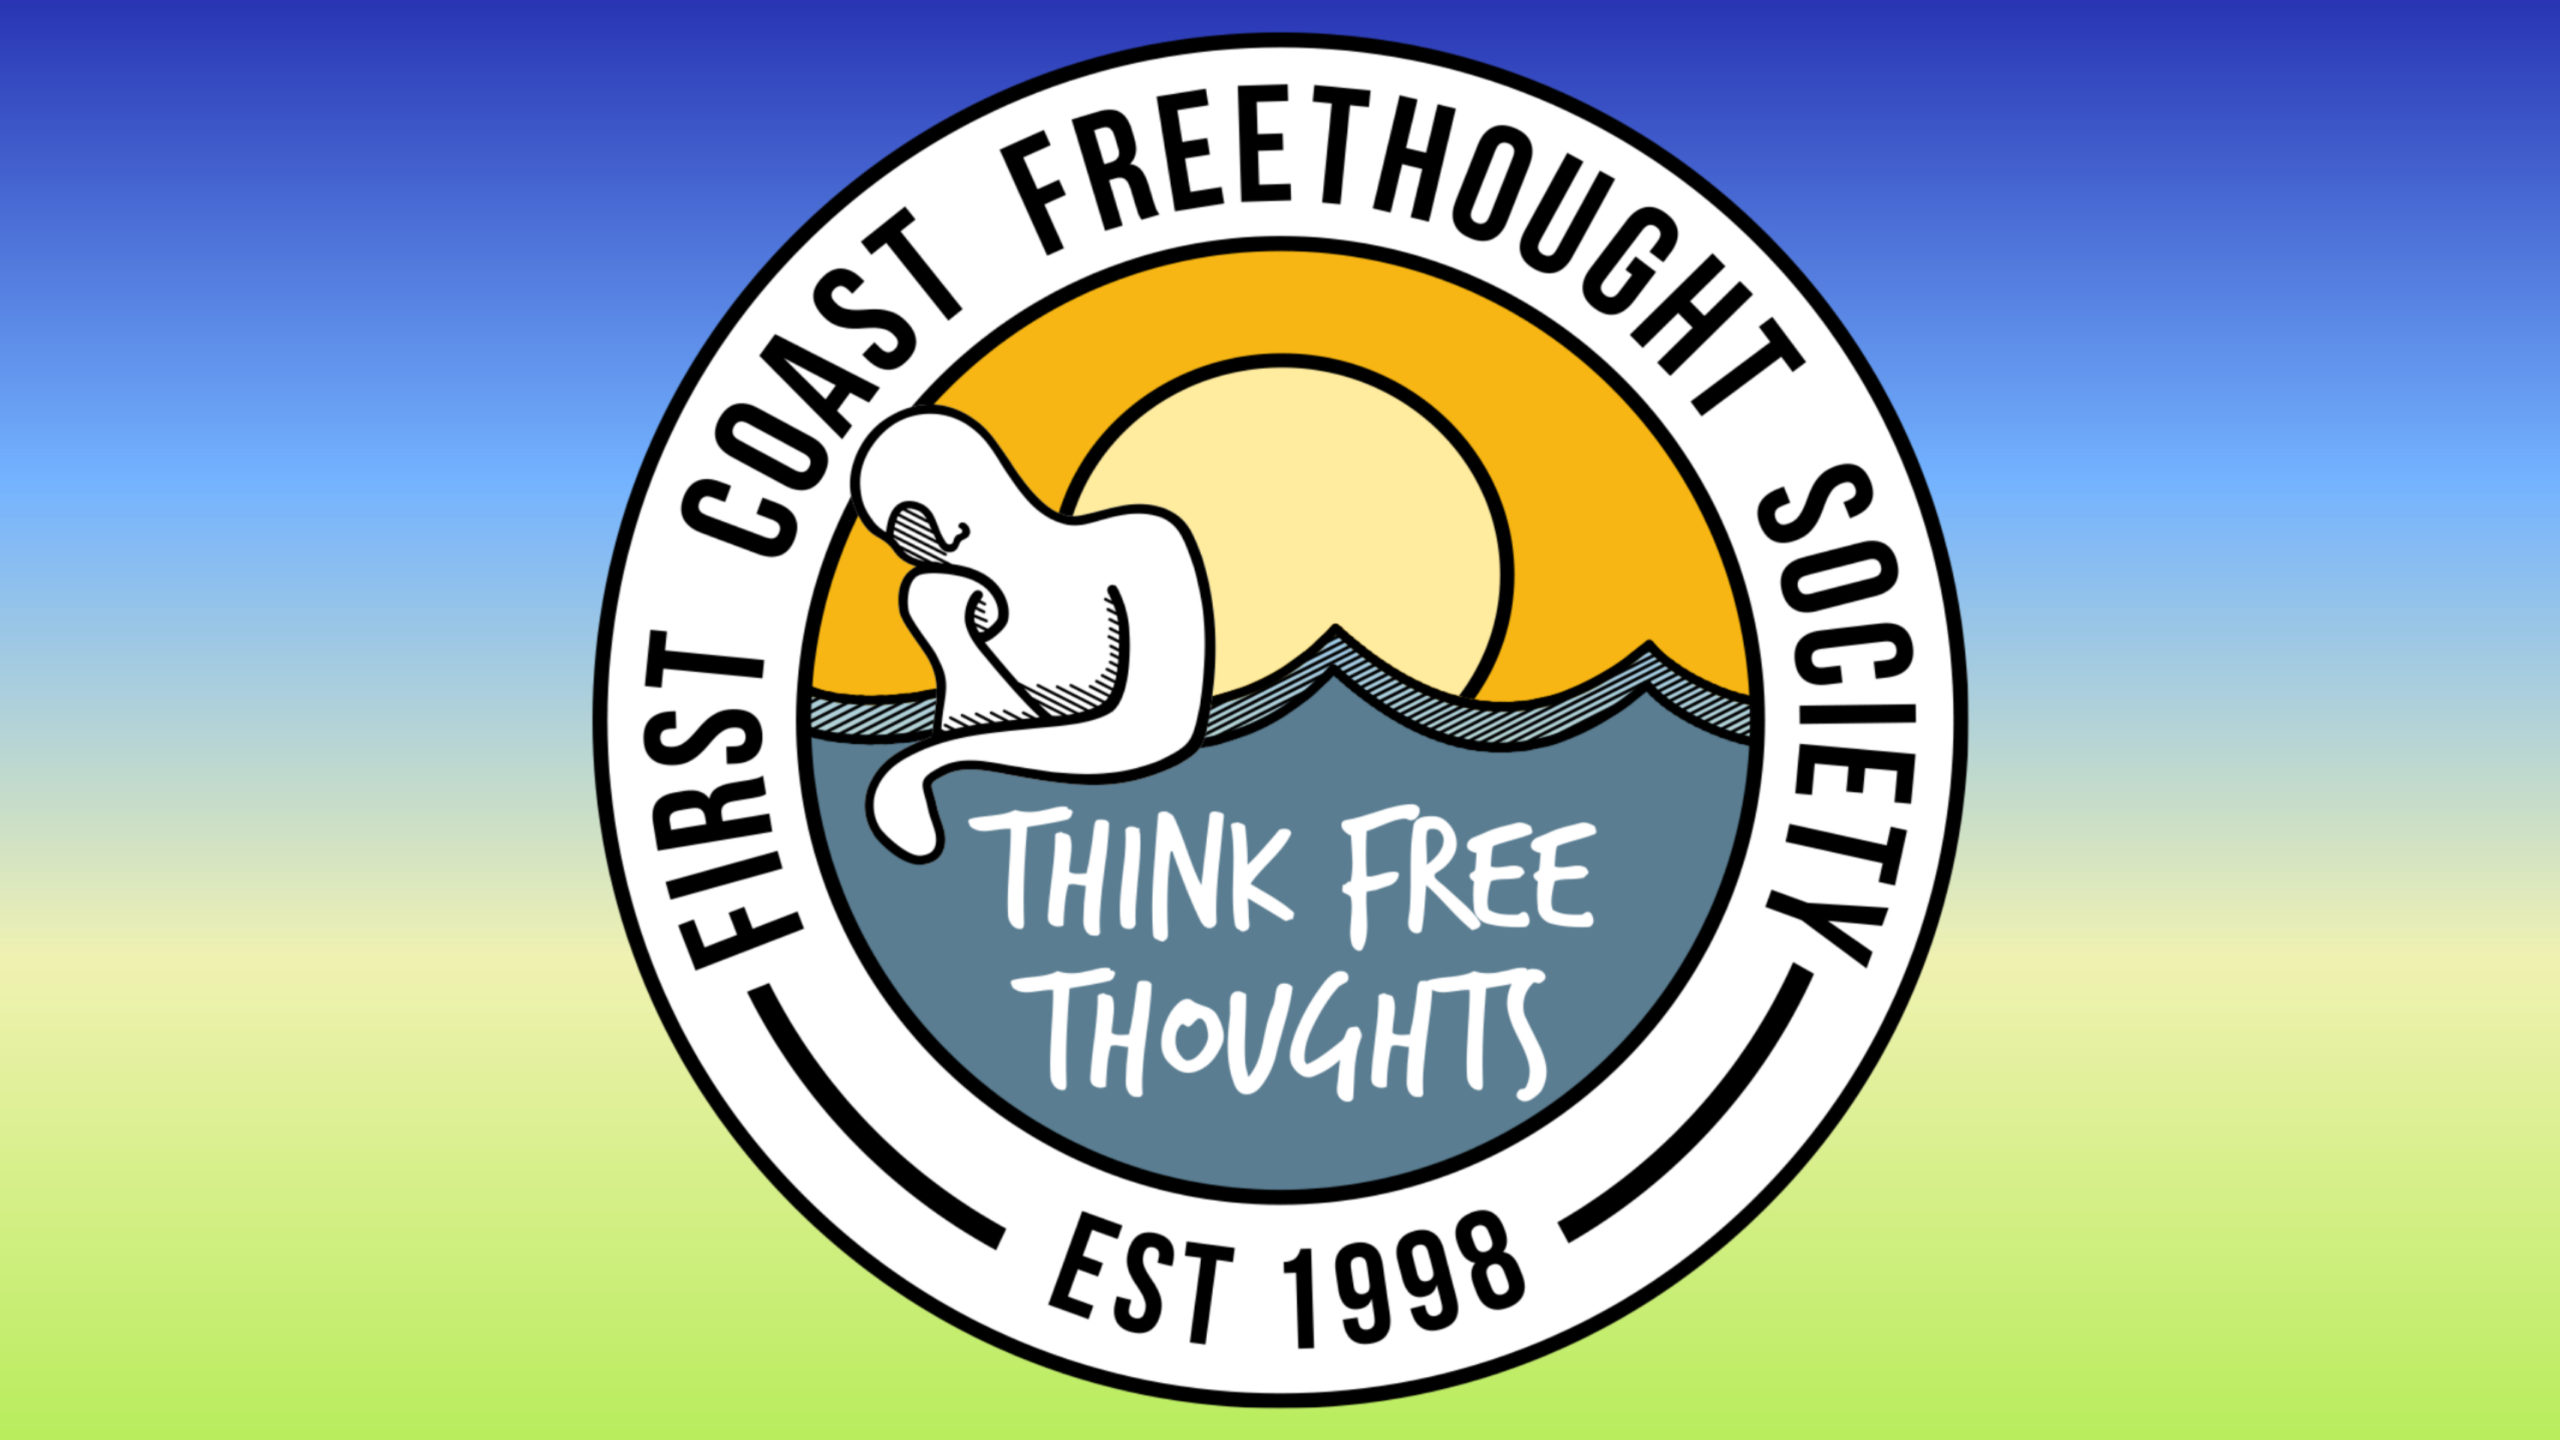 First Coast Freethought Society